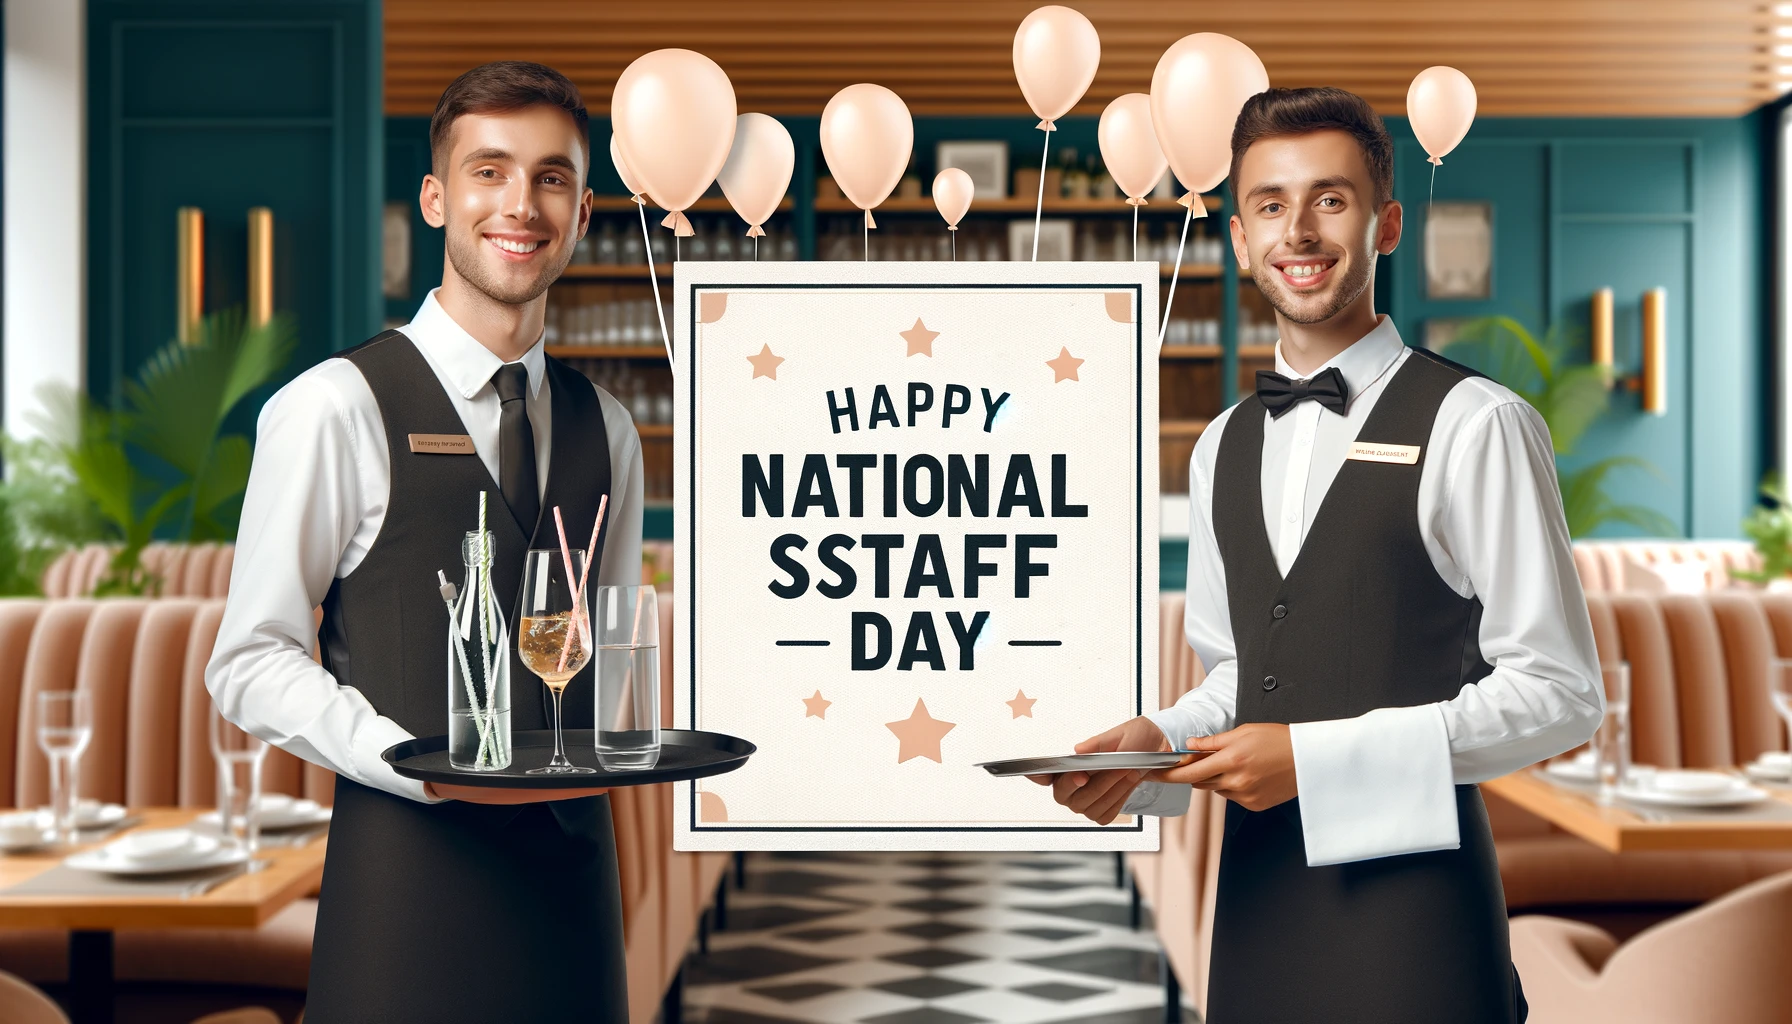 Flirty Compliments for Waitstaff on Their Special Day